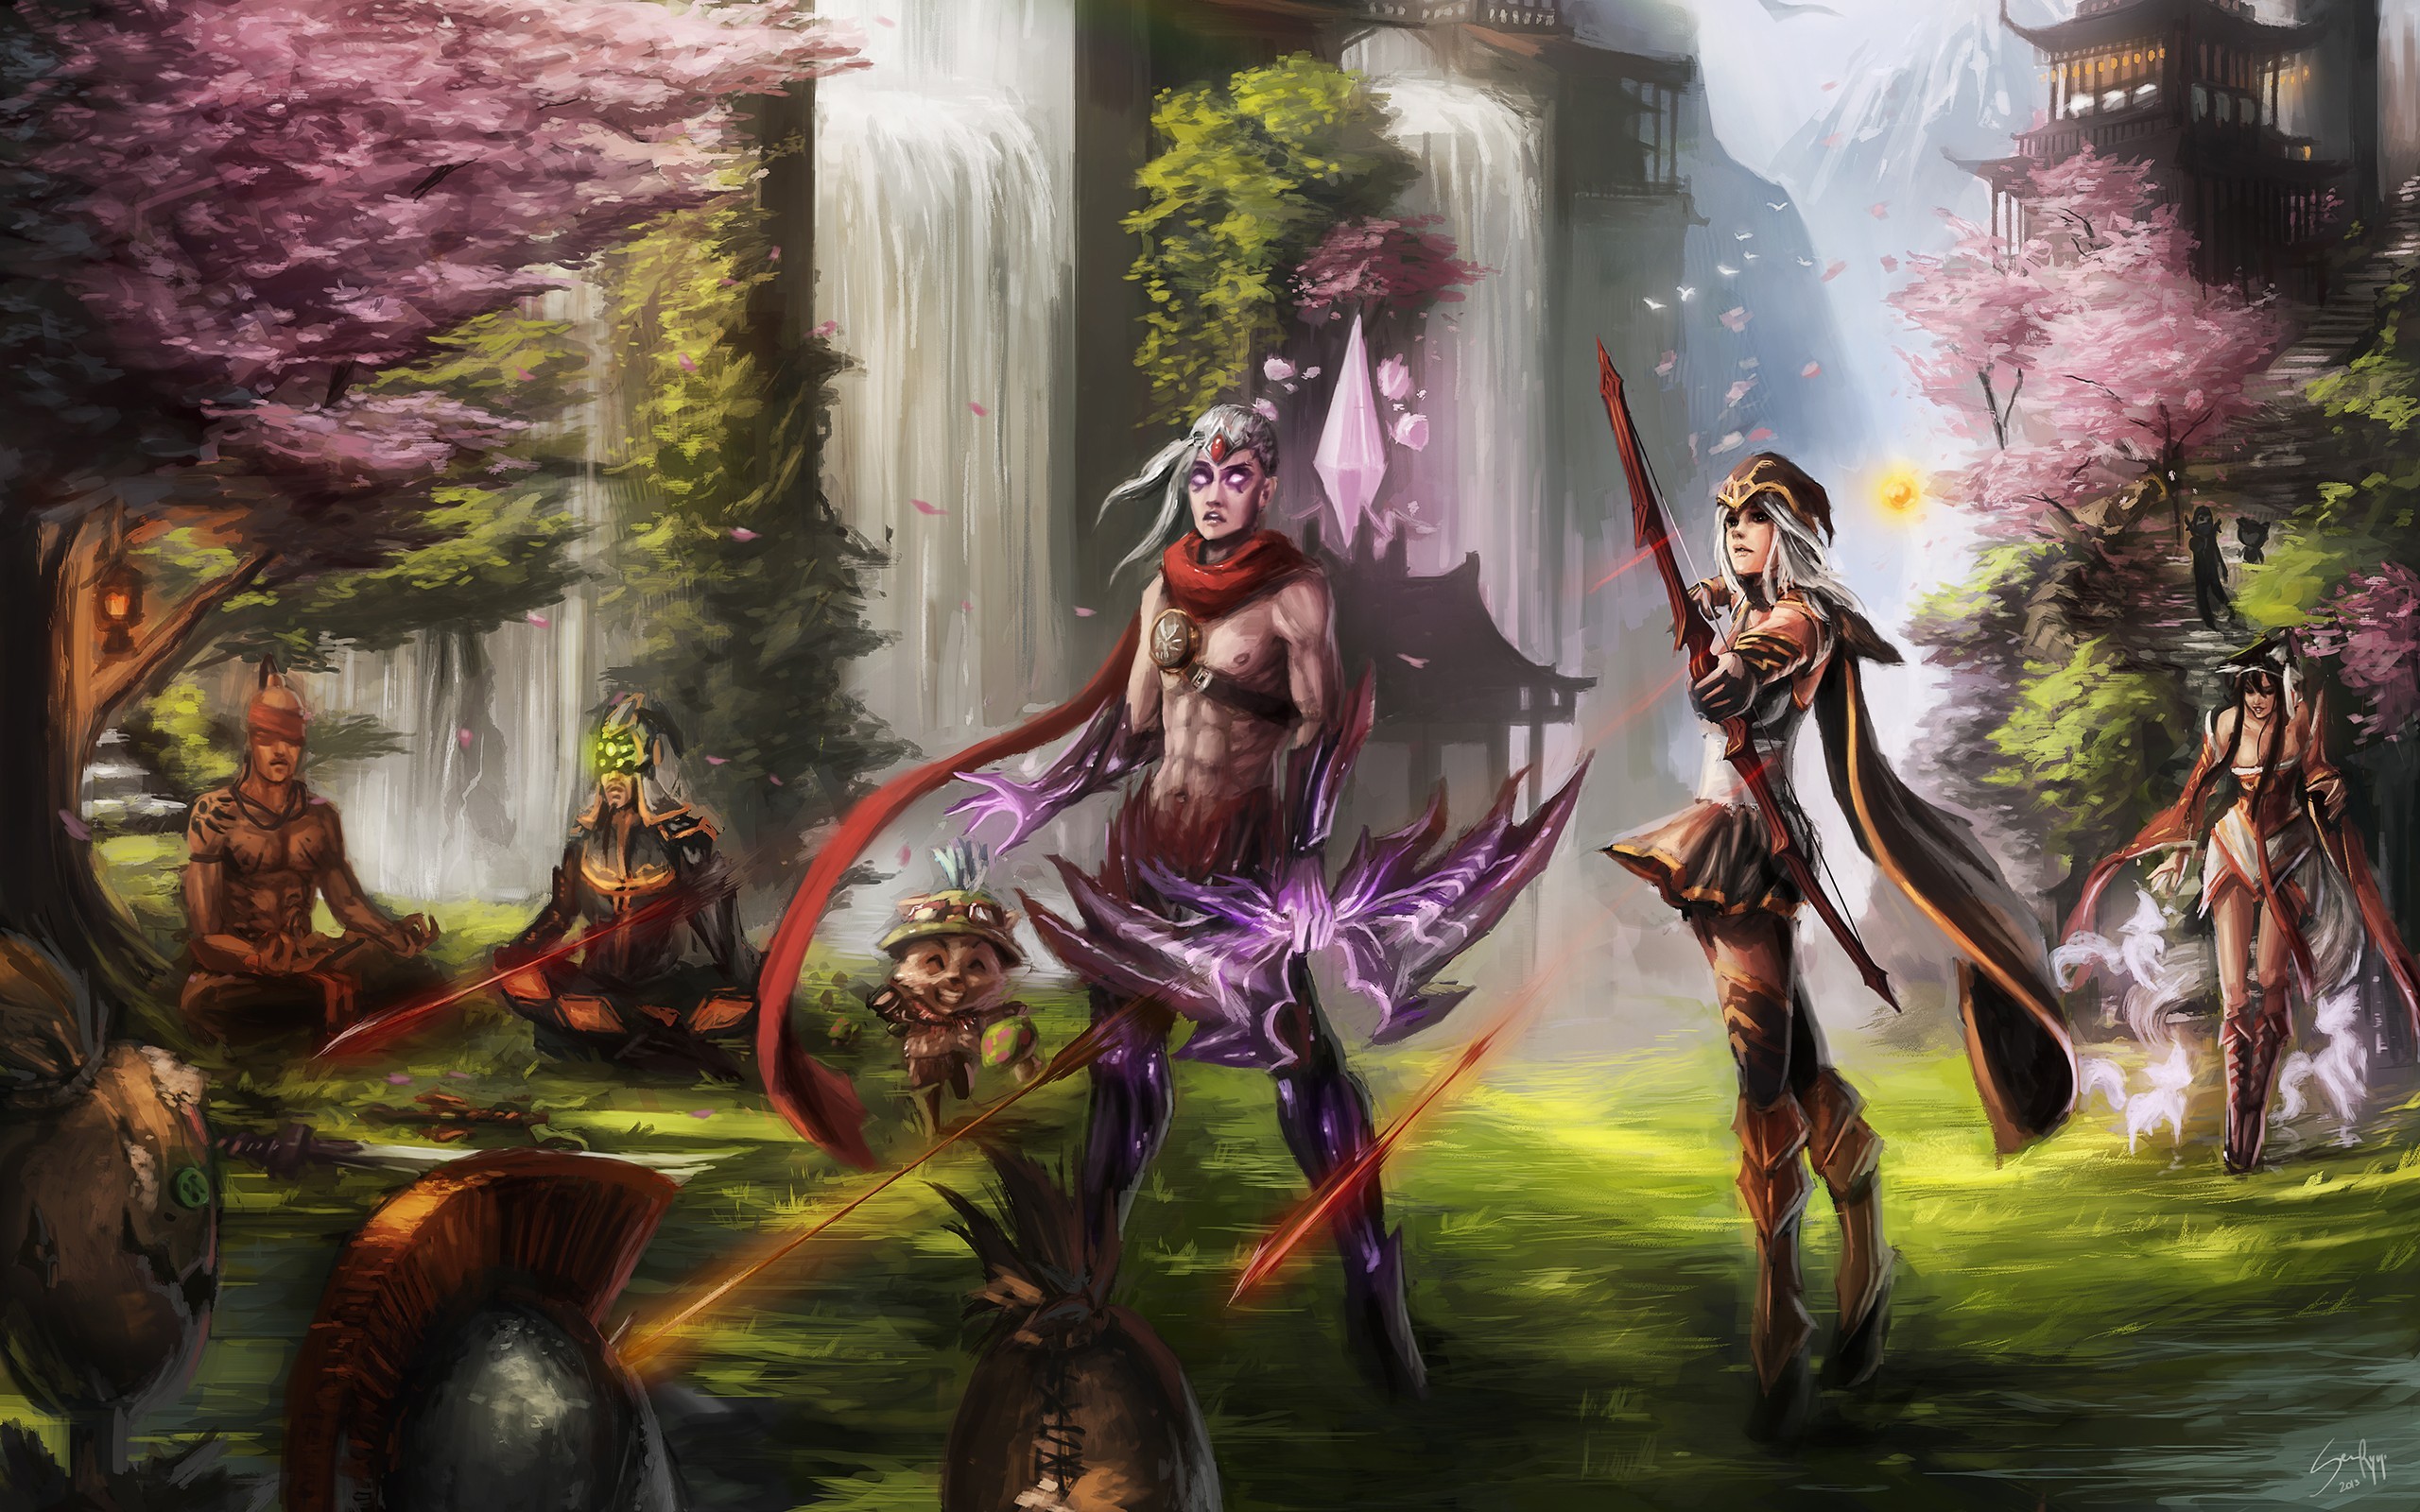 General 2560x1600 League of Legends video games fantasy art Ashe (League of Legends) Lee Sin (League of Legends) Varus (League of Legends) Teemo (League of Legends) Ahri (League of Legends) master yi (league of legends) video game art Fiddlesticks (League of Legends) PC gaming video game characters